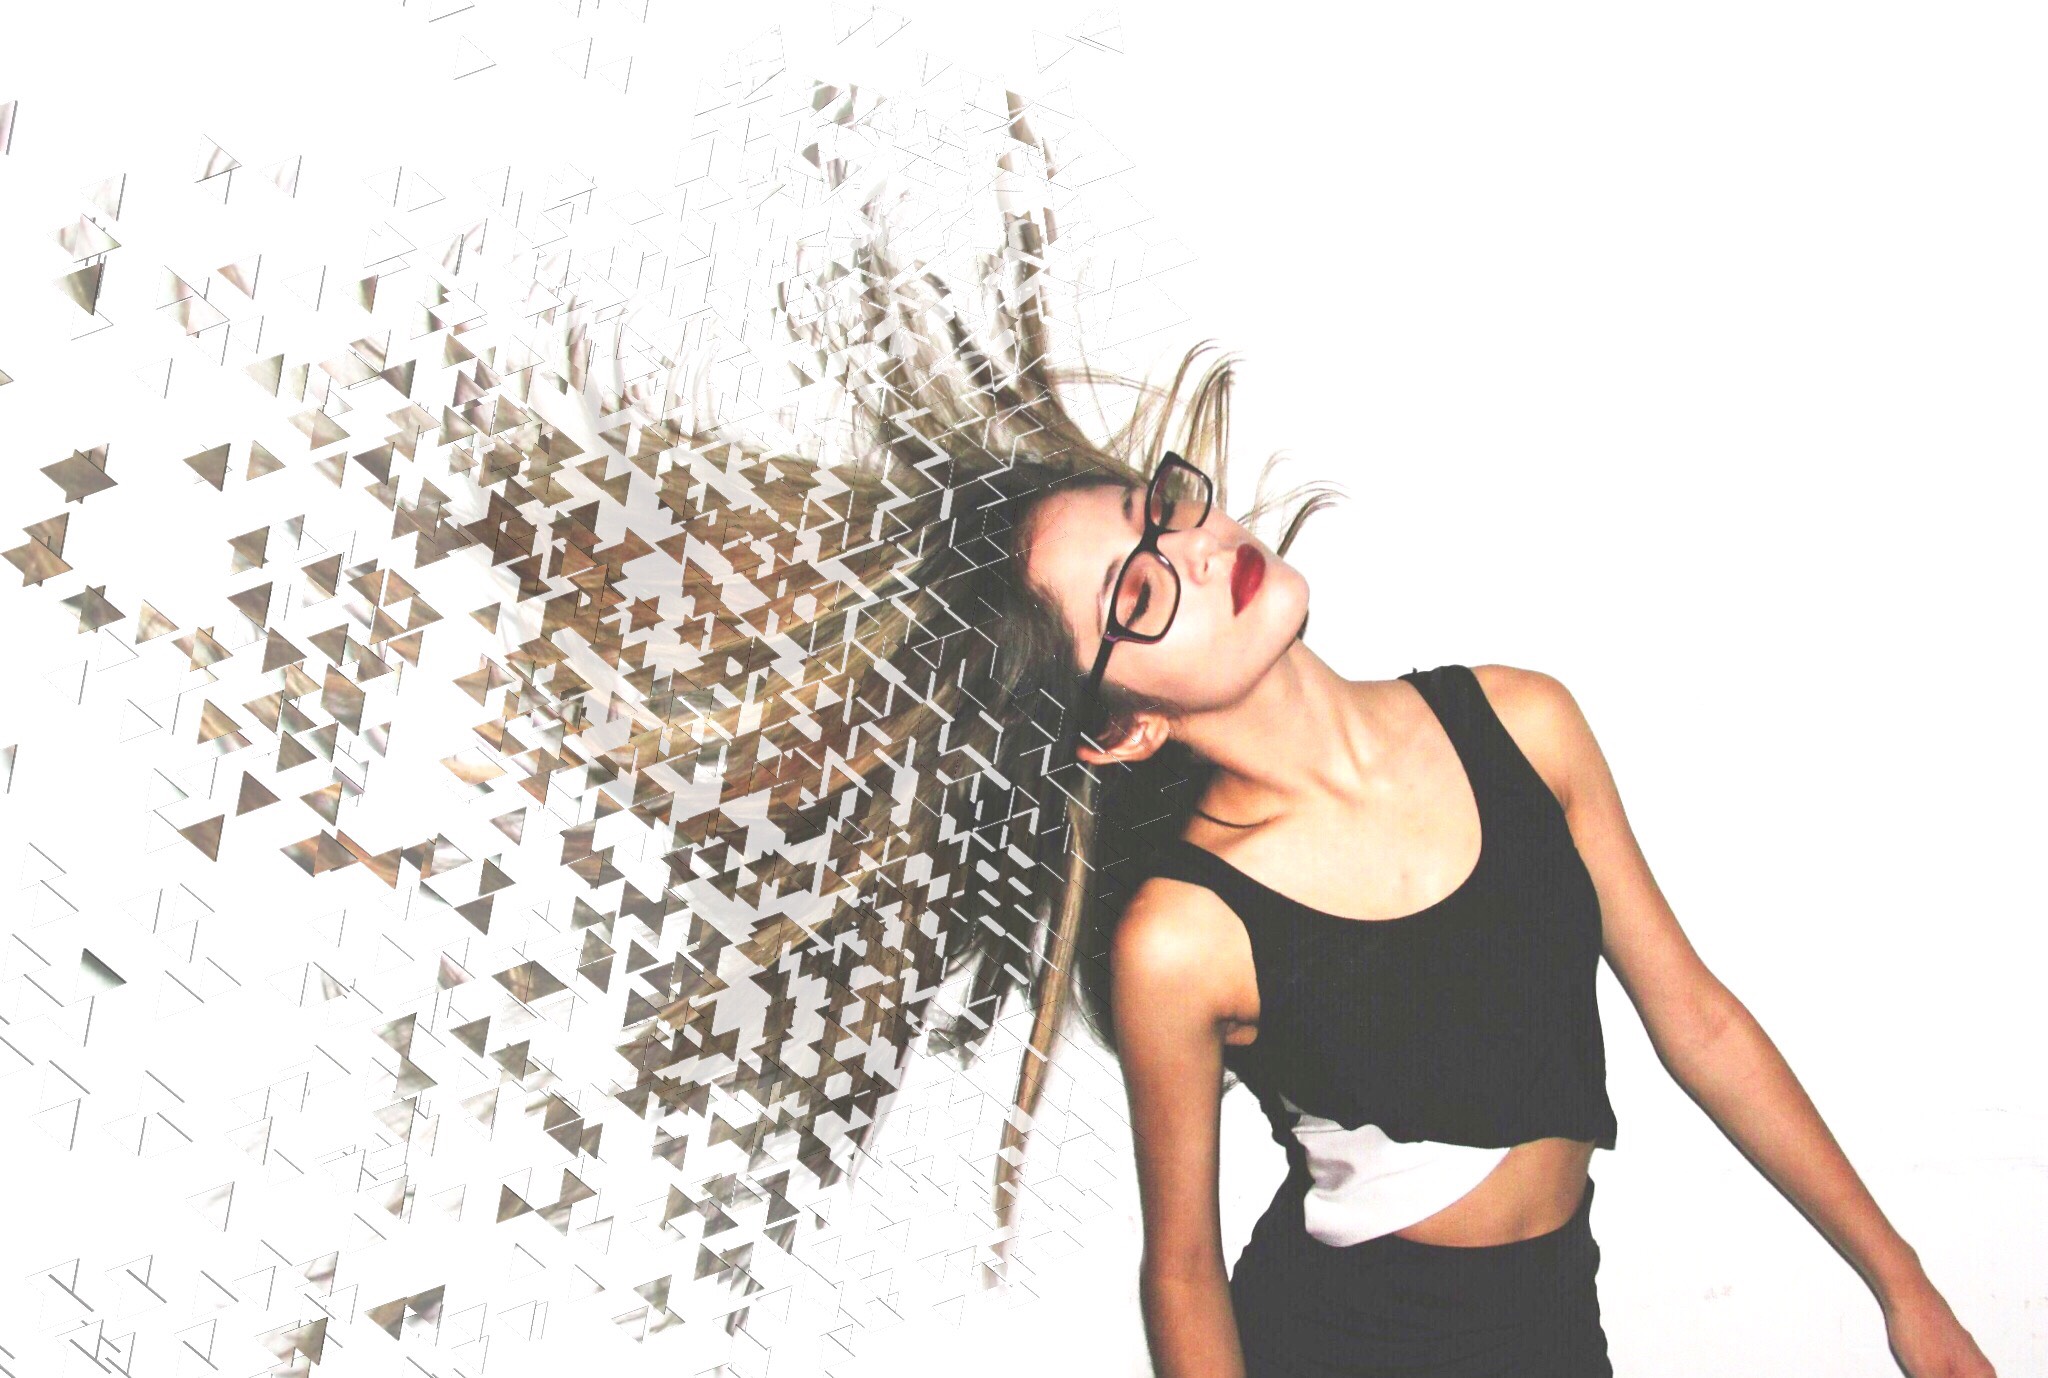 New How To Make A Dispersion Photo Effect With Picsart